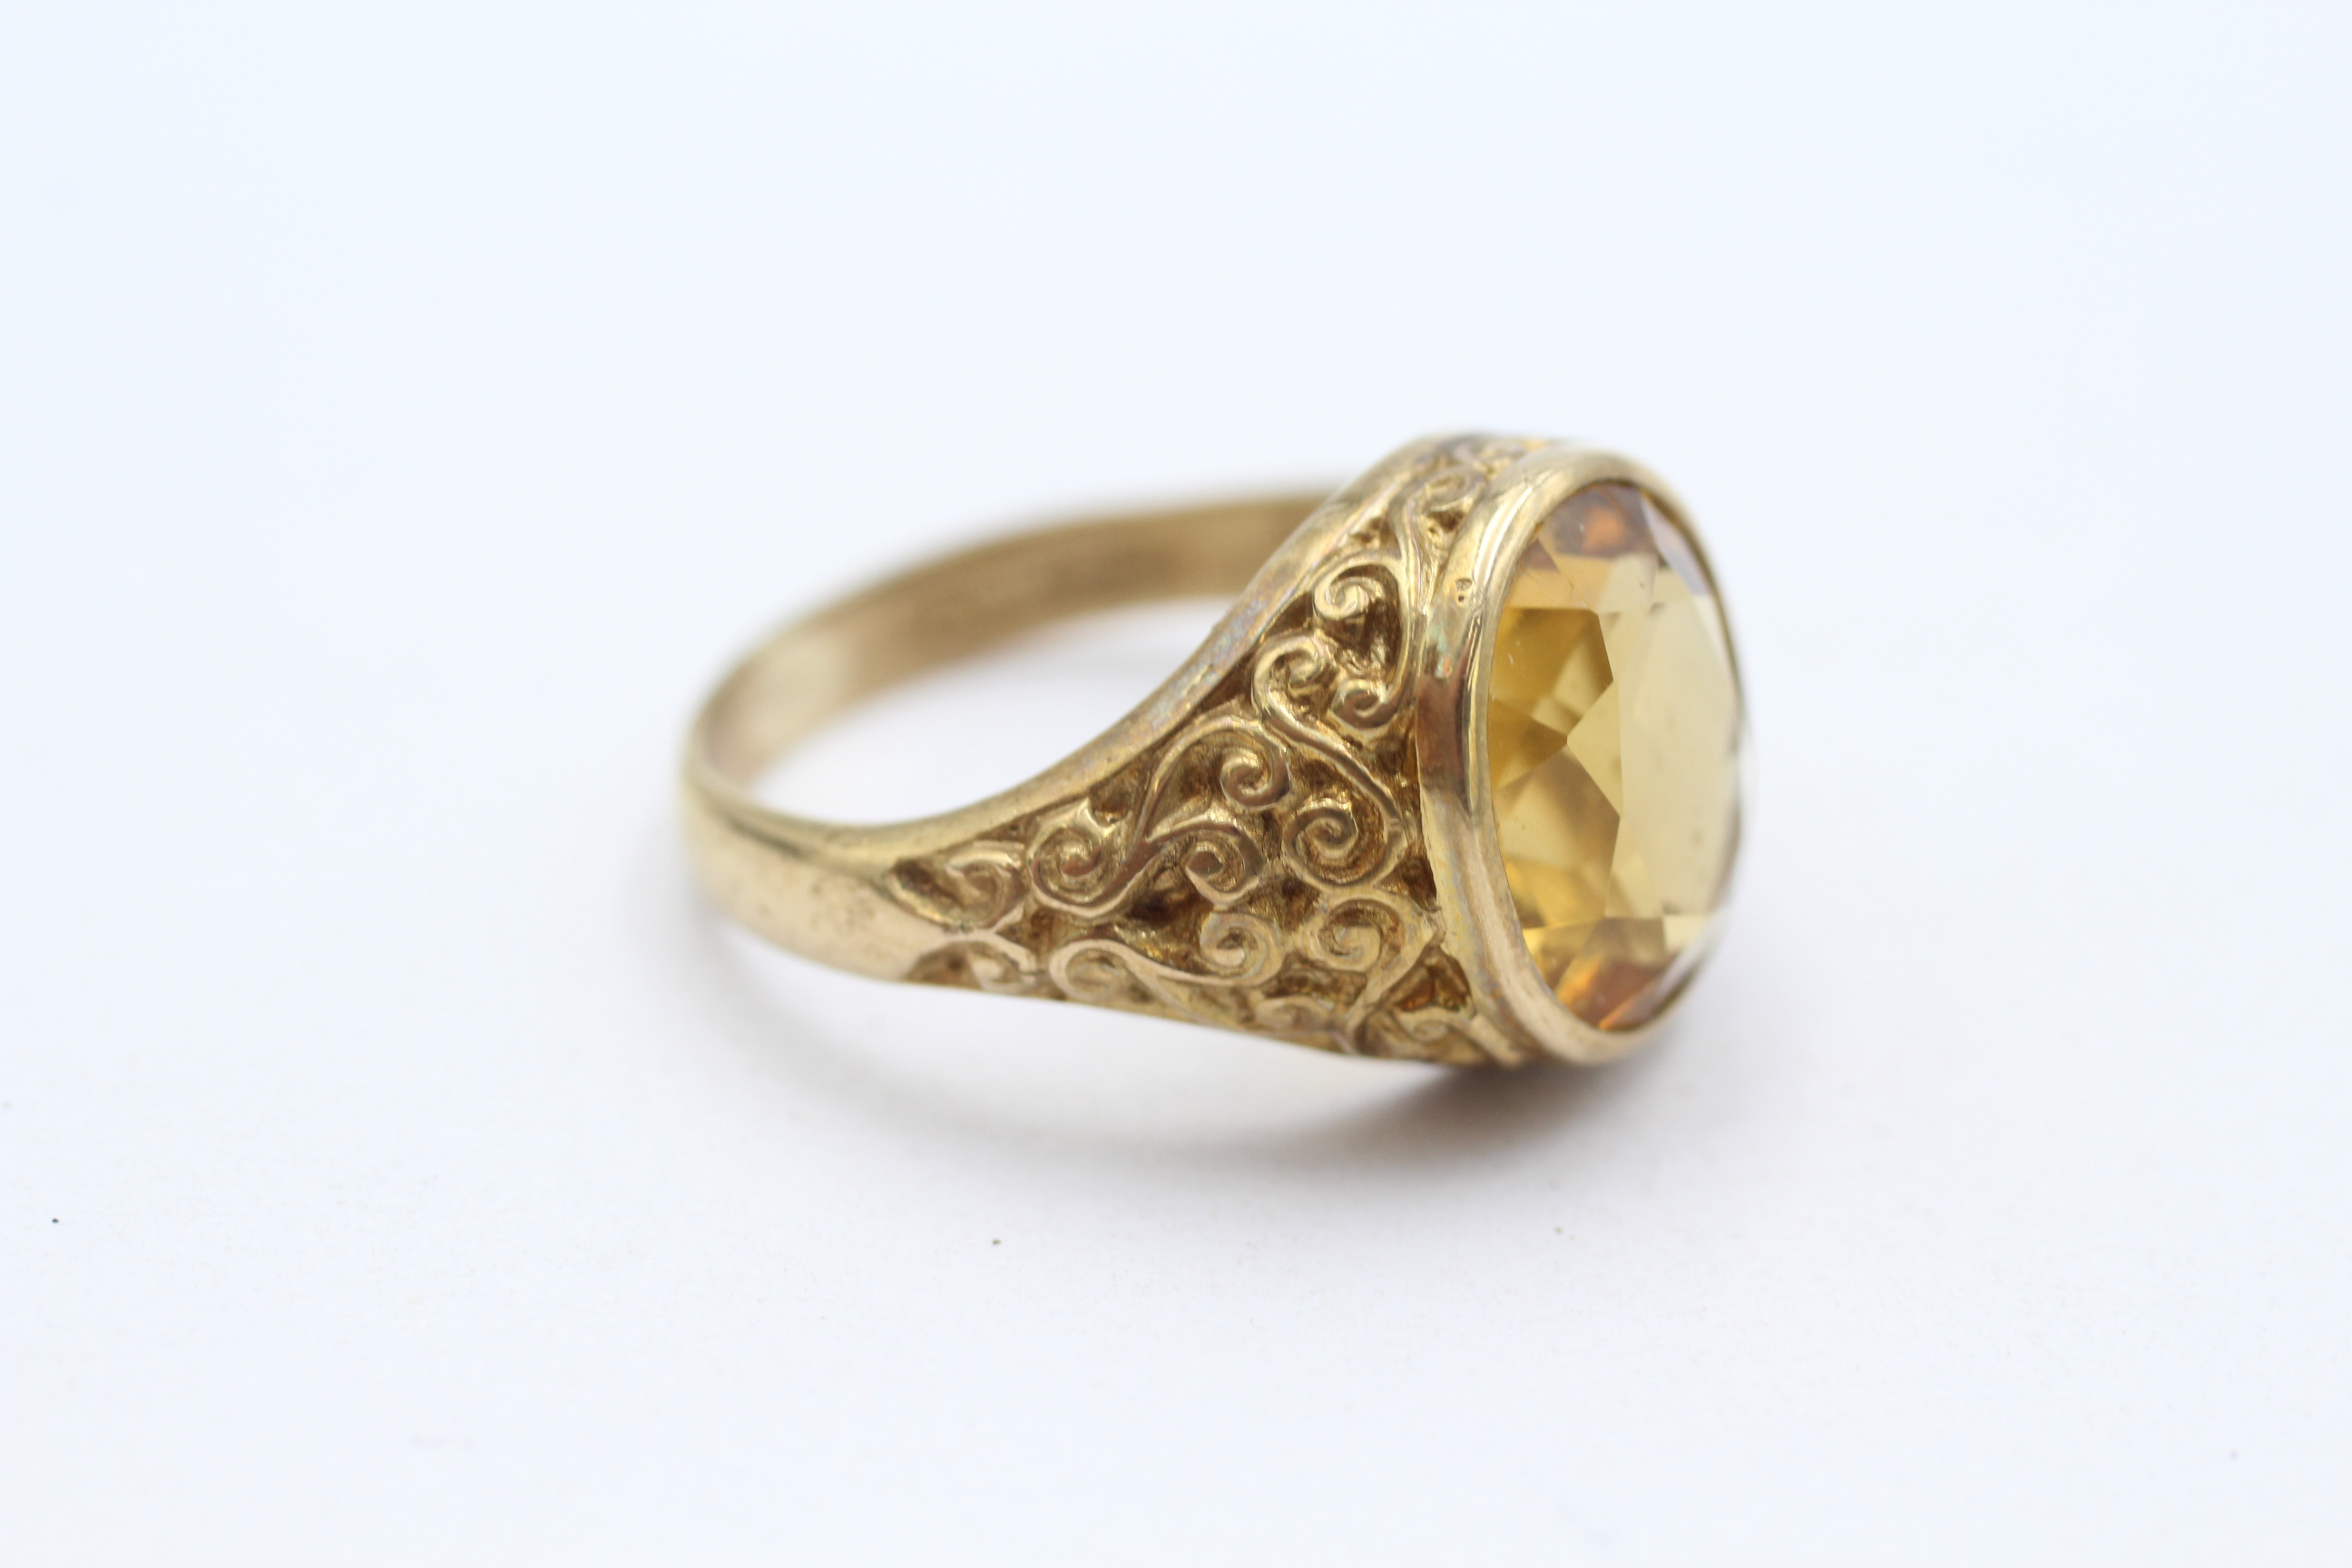 9ct gold oval citrine single stone ring with scrolling shoulders Size O - 5.5 g - Image 2 of 4